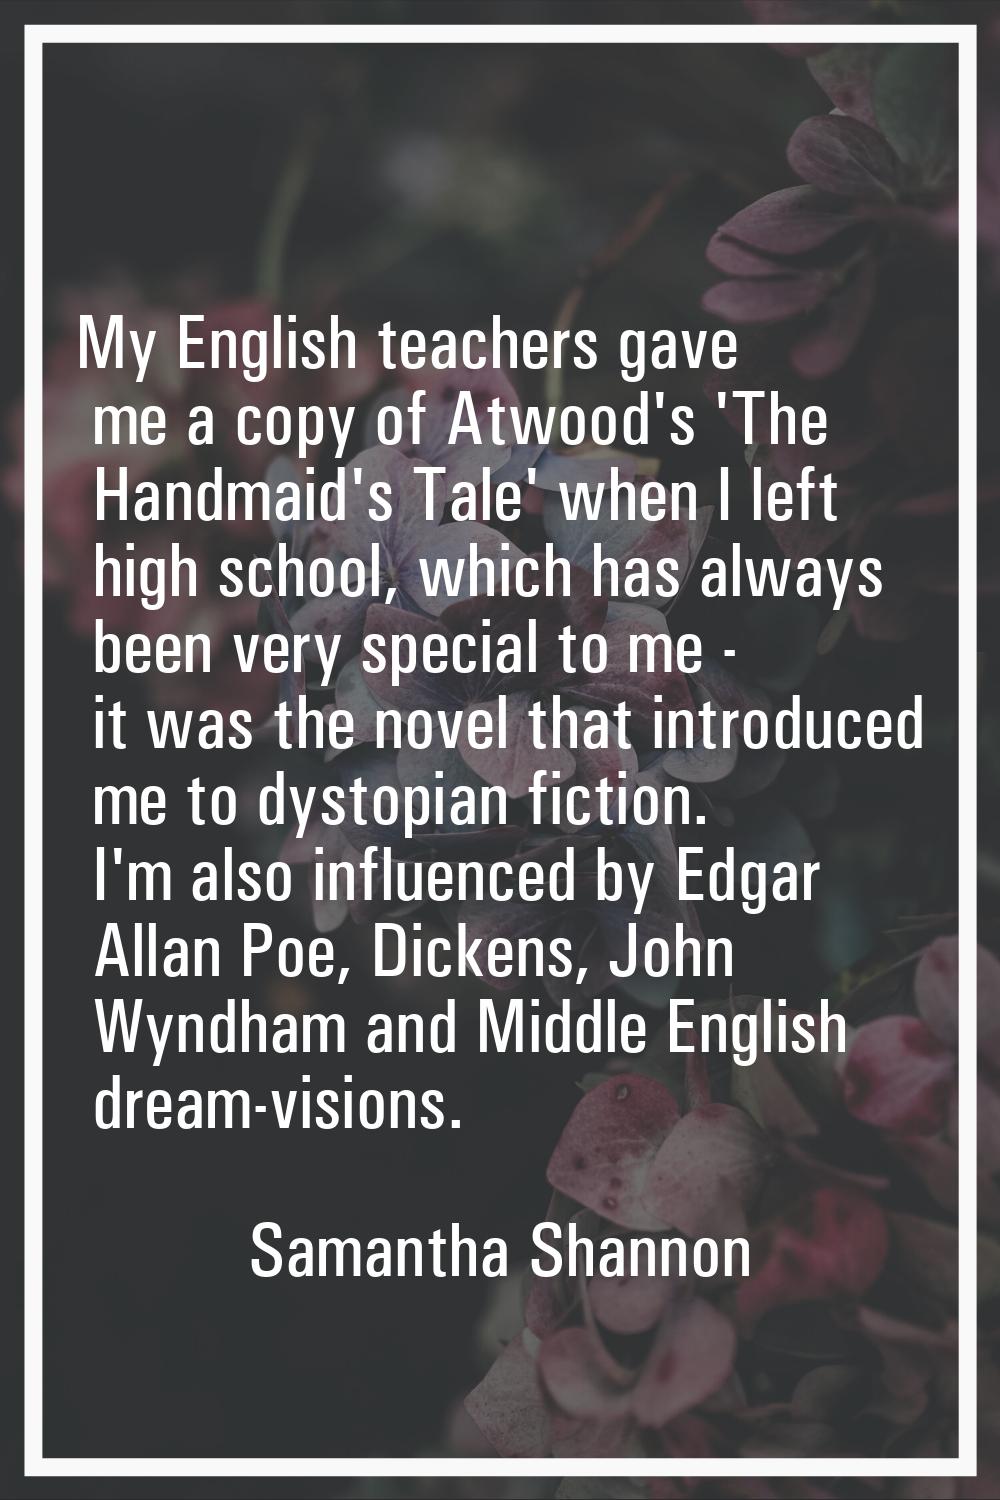 My English teachers gave me a copy of Atwood's 'The Handmaid's Tale' when I left high school, which